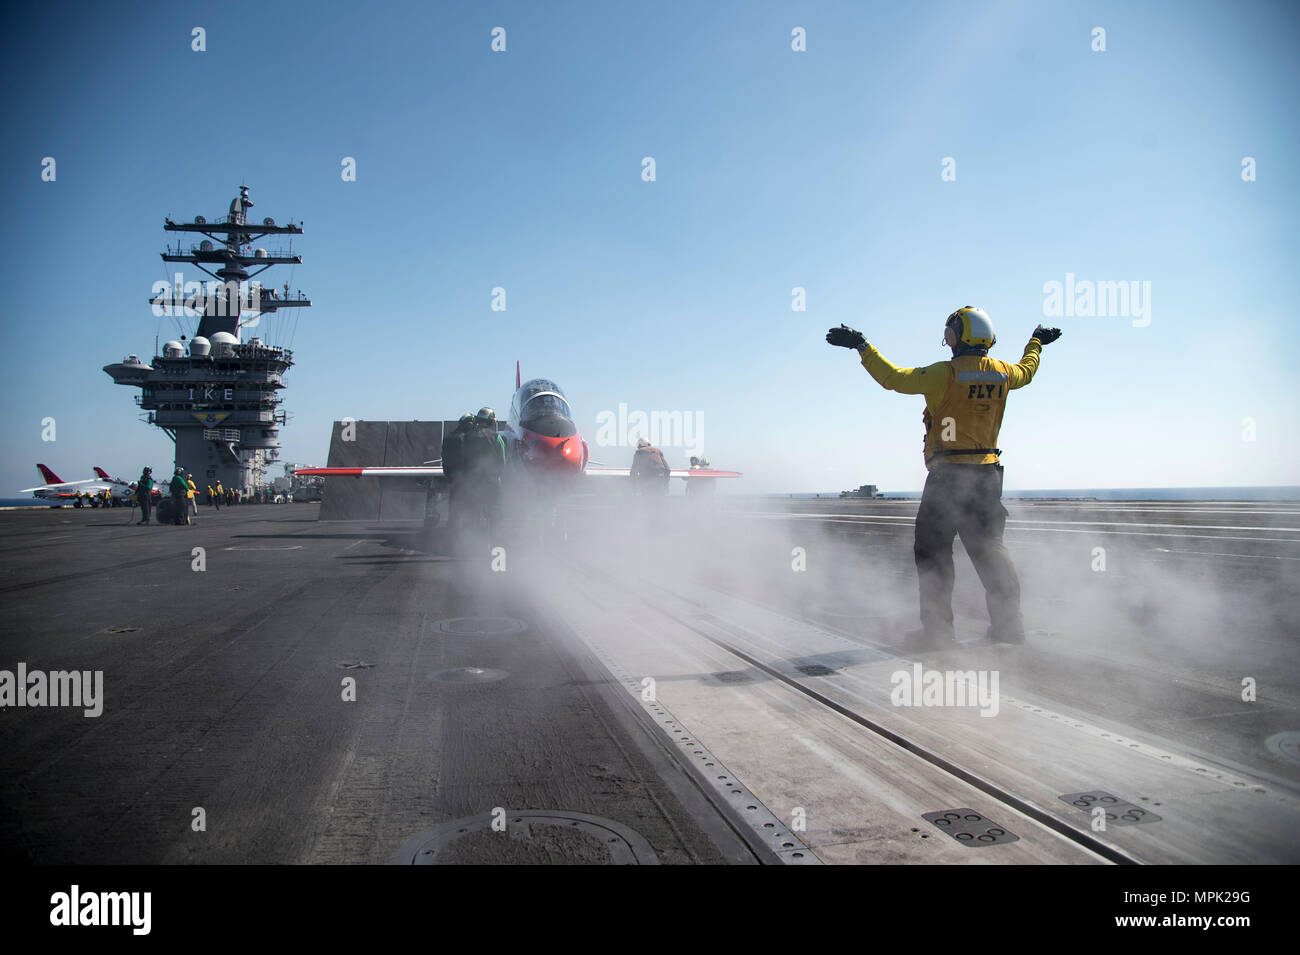 170209-N-OS569-403    ATLANTIC OCEAN (Feb. 9, 2017) A T-45C Goshawk assigned to Carrier Training Wing (CTW) 2 taxis onto the catapult on the flight deck of the aircraft carrier USS Dwight D. Eisenhower (CVN 69) (Ike). Ike is currently conducting aircraft carrier qualifications during the sustainment phase of the Optimized Fleet Response Plan (OFRP). (U.S. Navy photo by Mass Communication Specialist Seaman Apprentice Zach Sleeper) Stock Photo